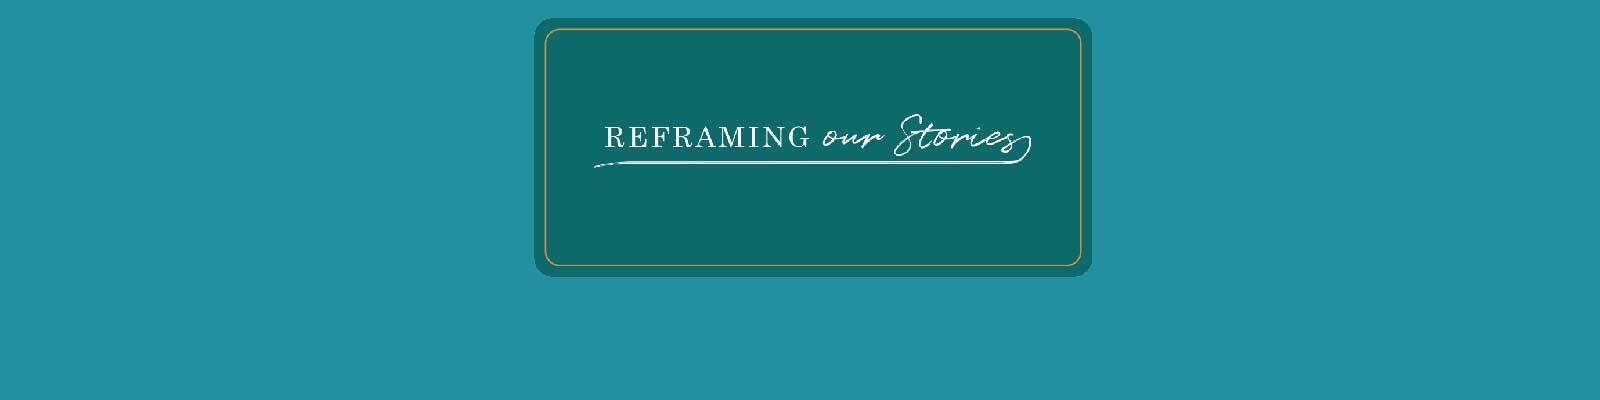 Reframing our Stories: The Podcast